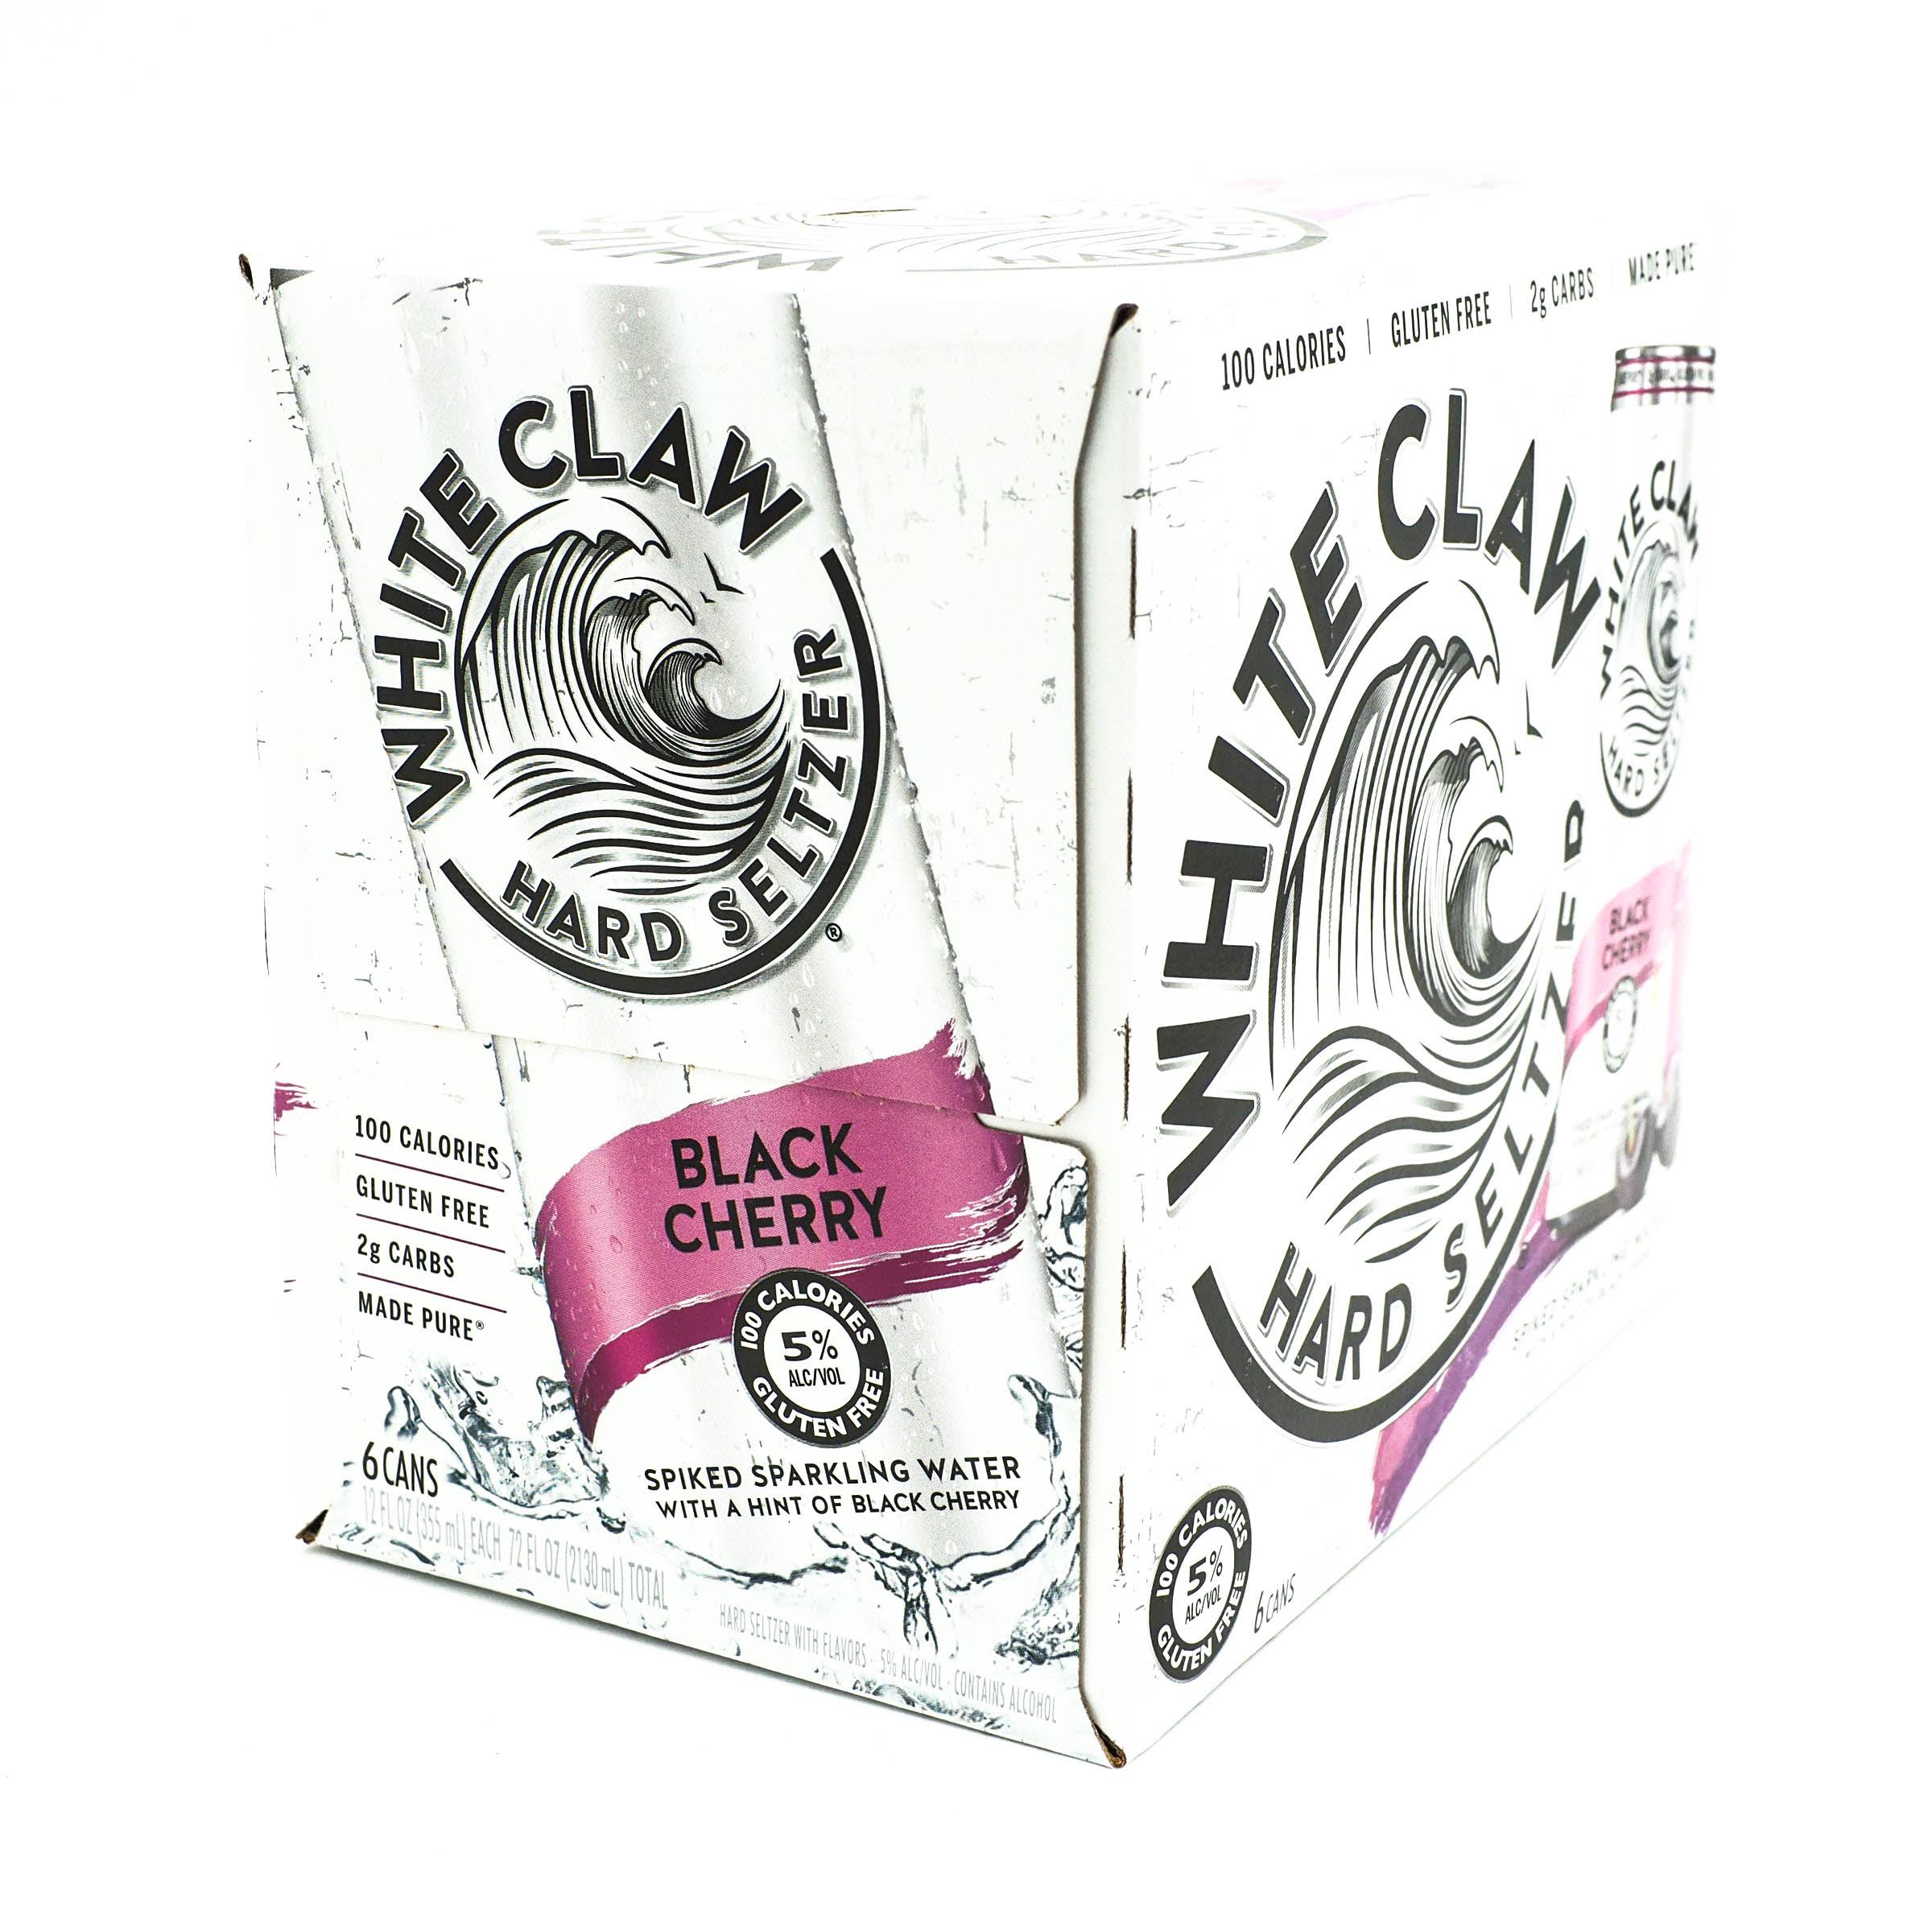 White Claw Hard Seltzer, Black Cherry - 6 pack, 12.0 fl oz cans